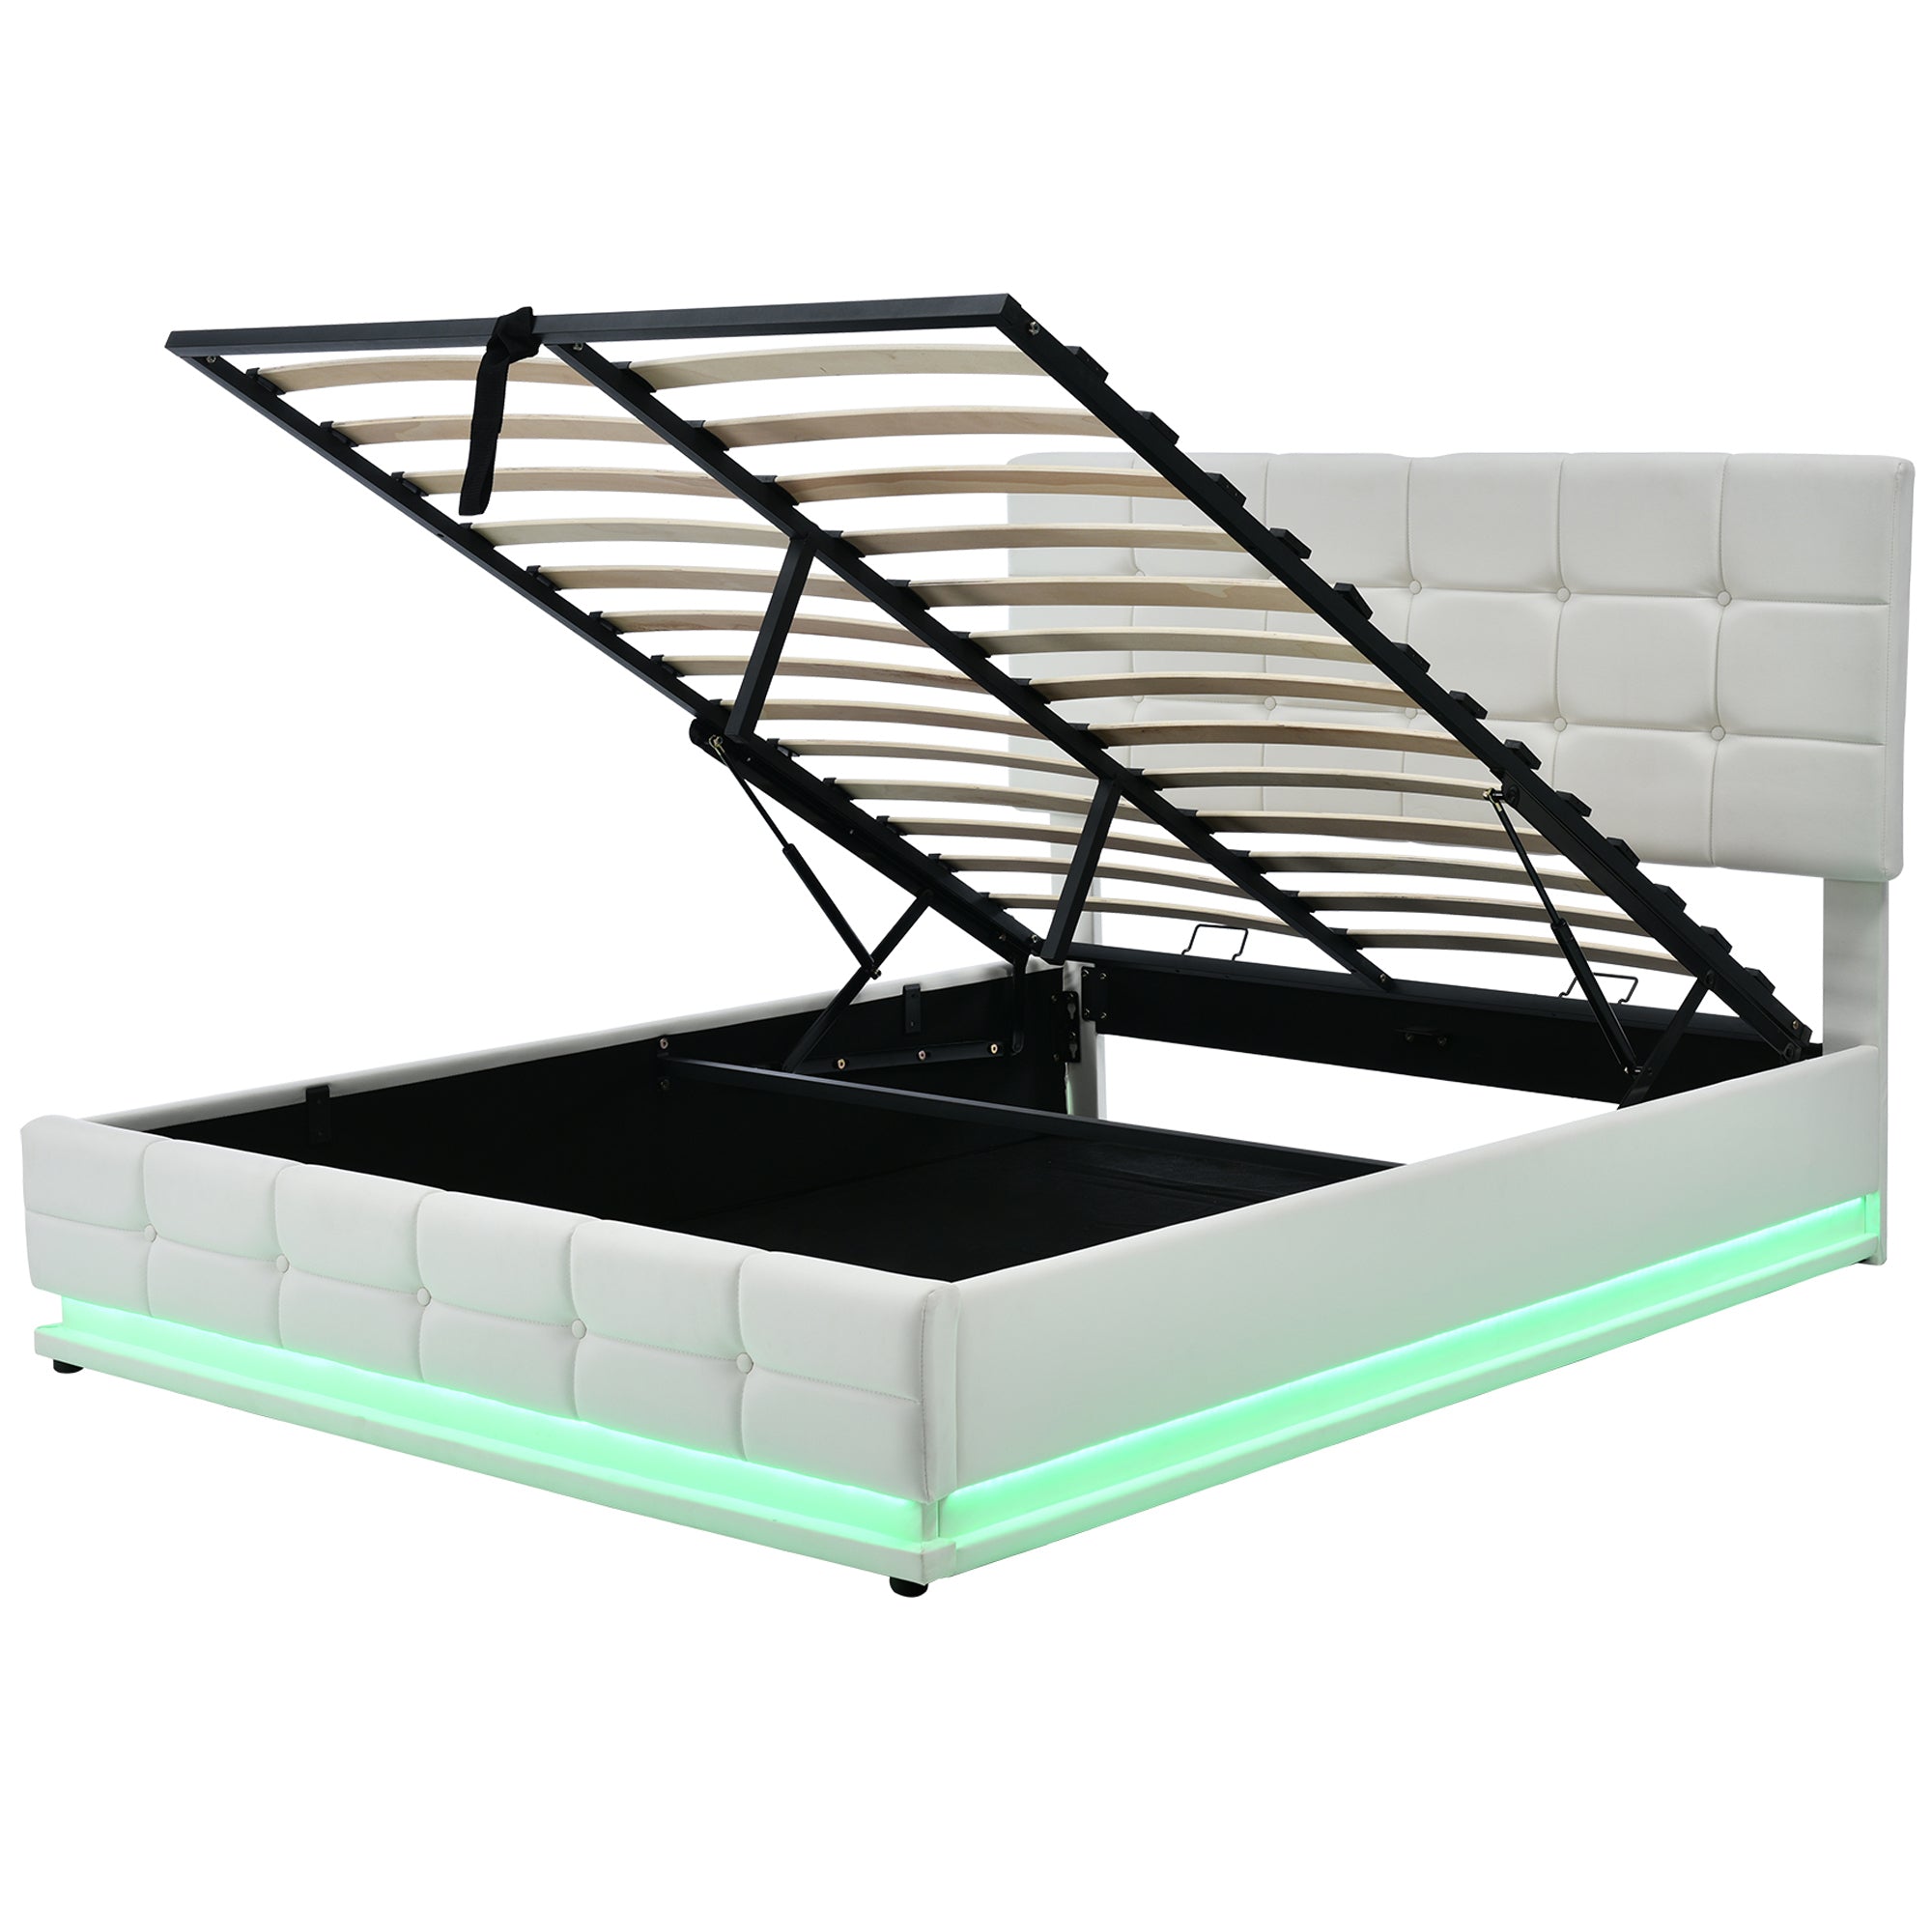 Kosmo White Queen Tufted Faux Leather Hydraulic Lift Platform Storage Bed With LED Light, USB Charger